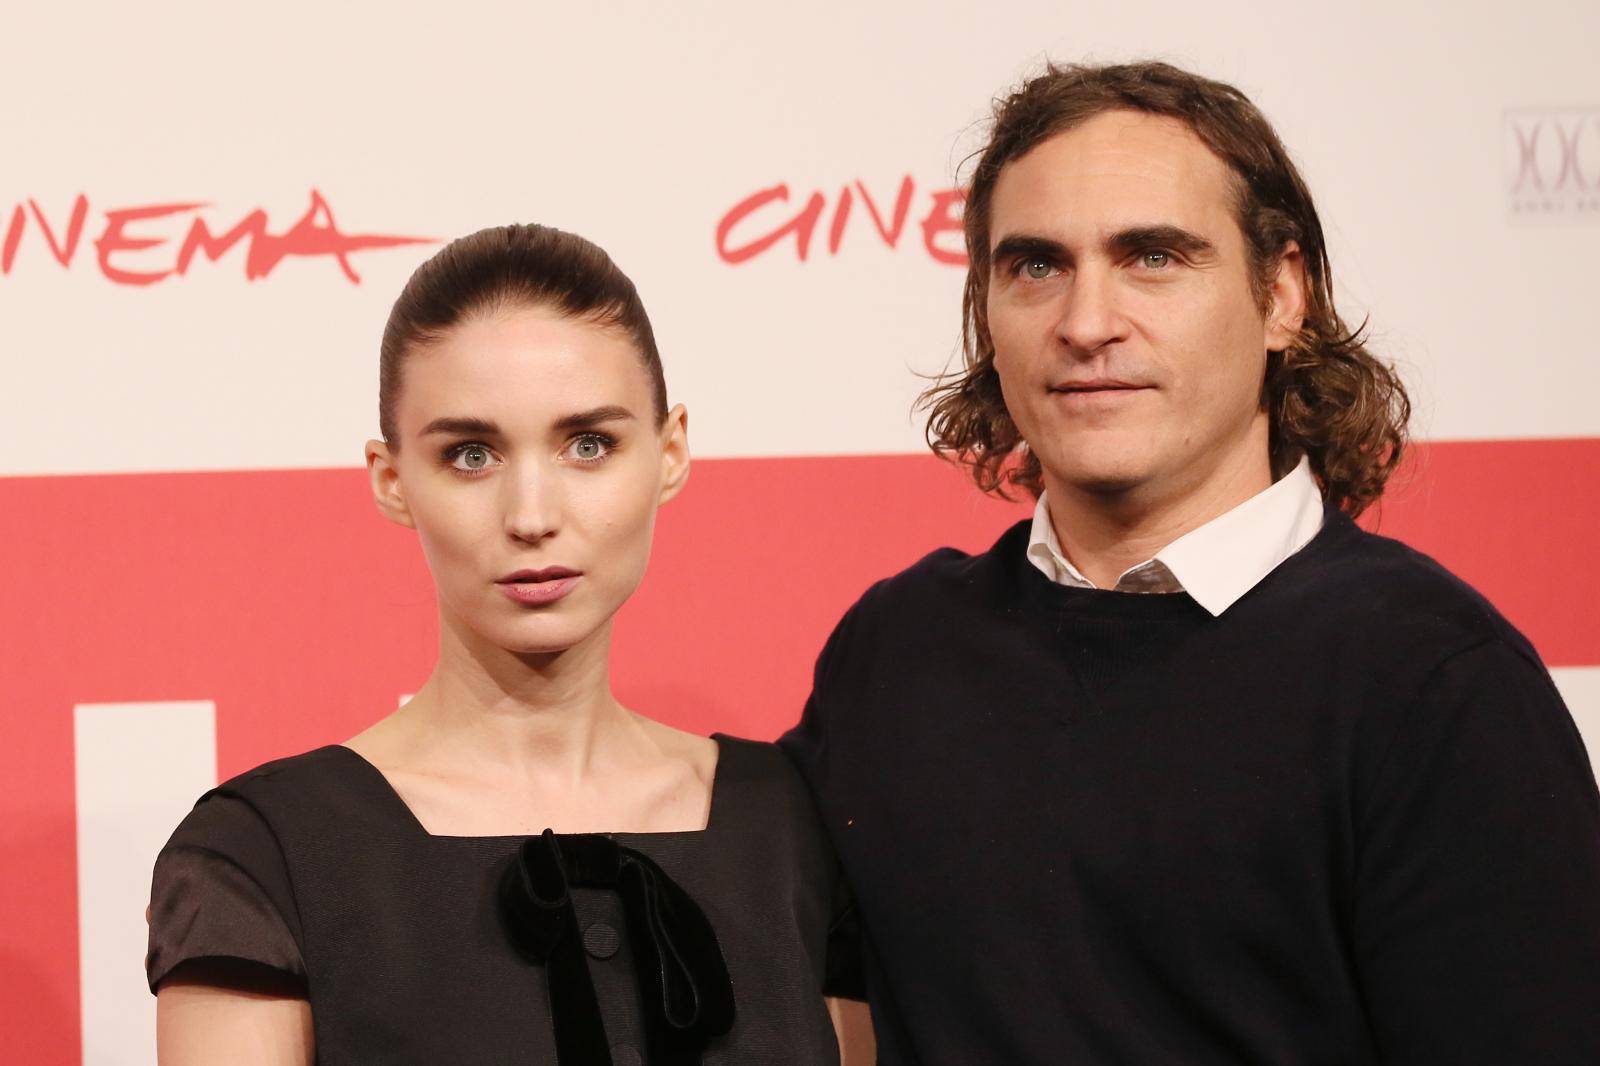 8th Rome Film Festival - 'Her' Photocall